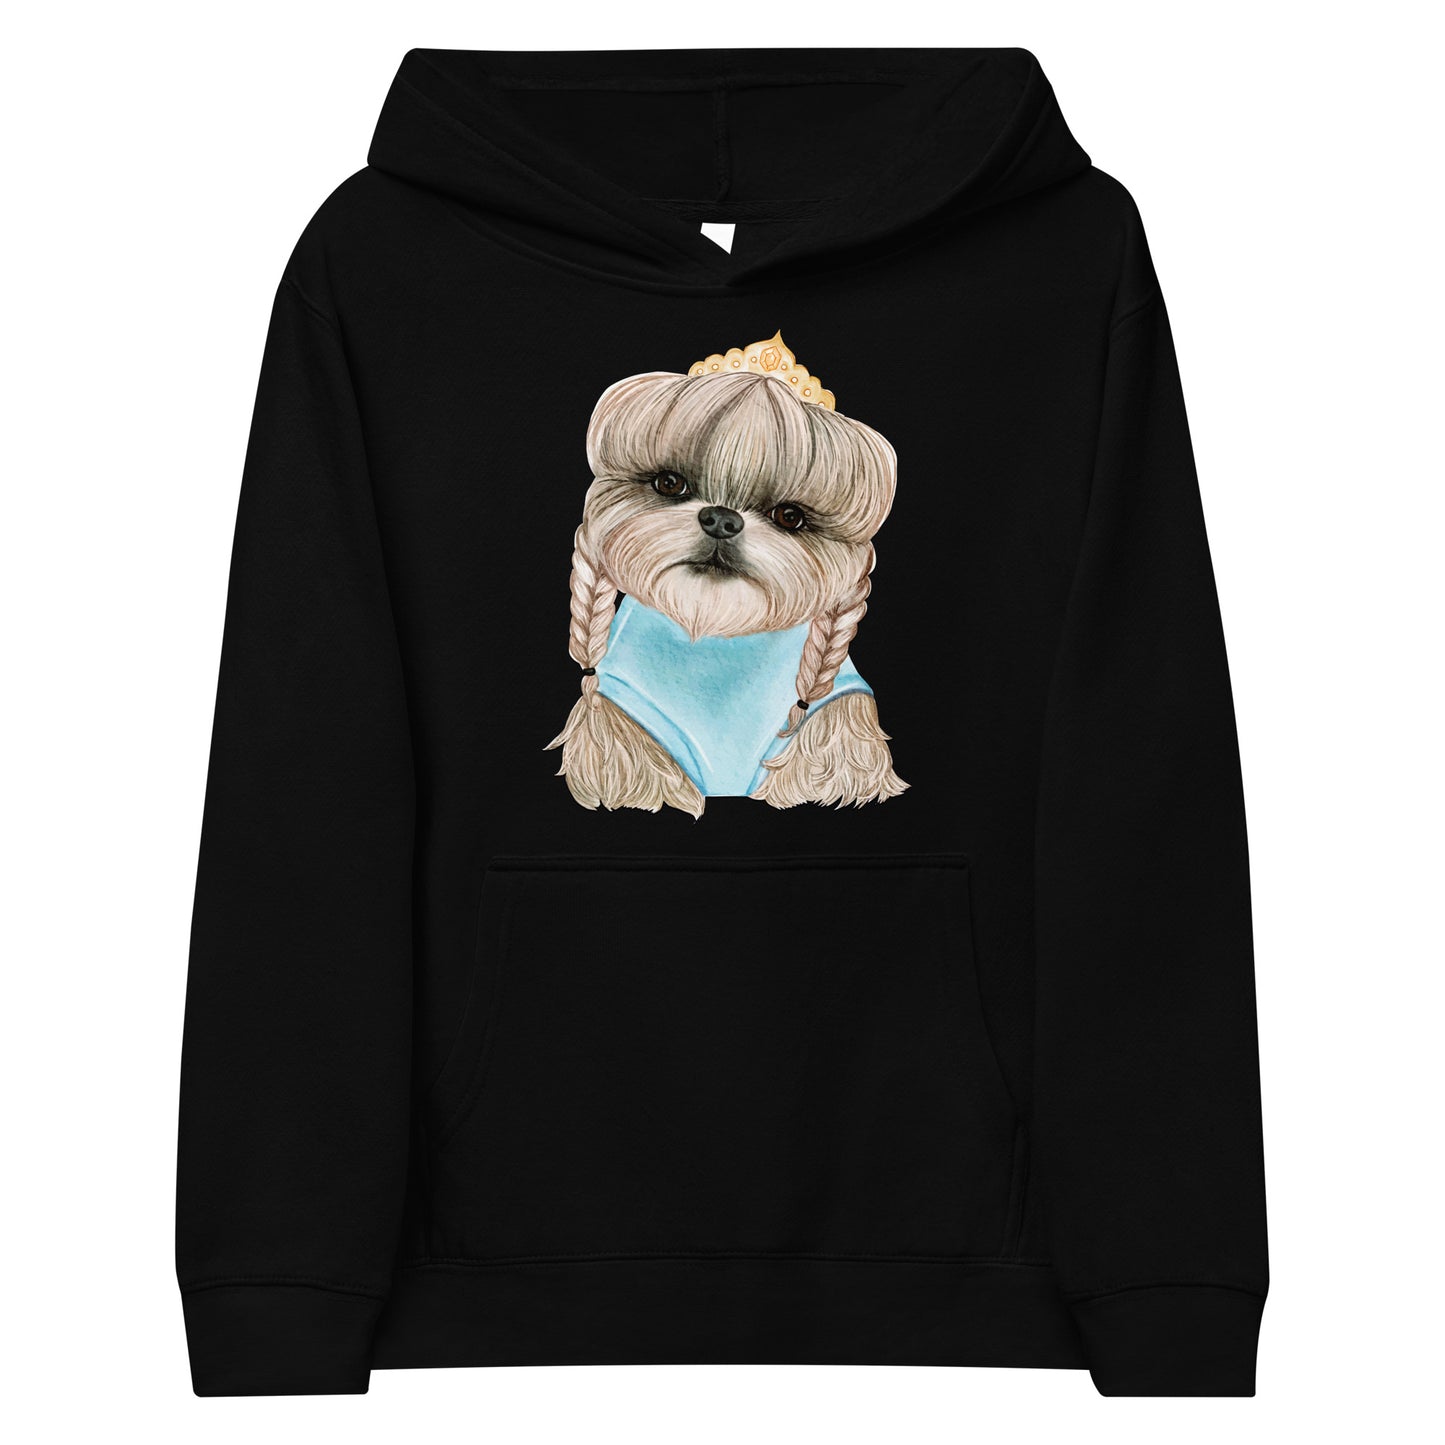 Adorable Dog with Hair Braids Crowns Hoodie, No. 0563